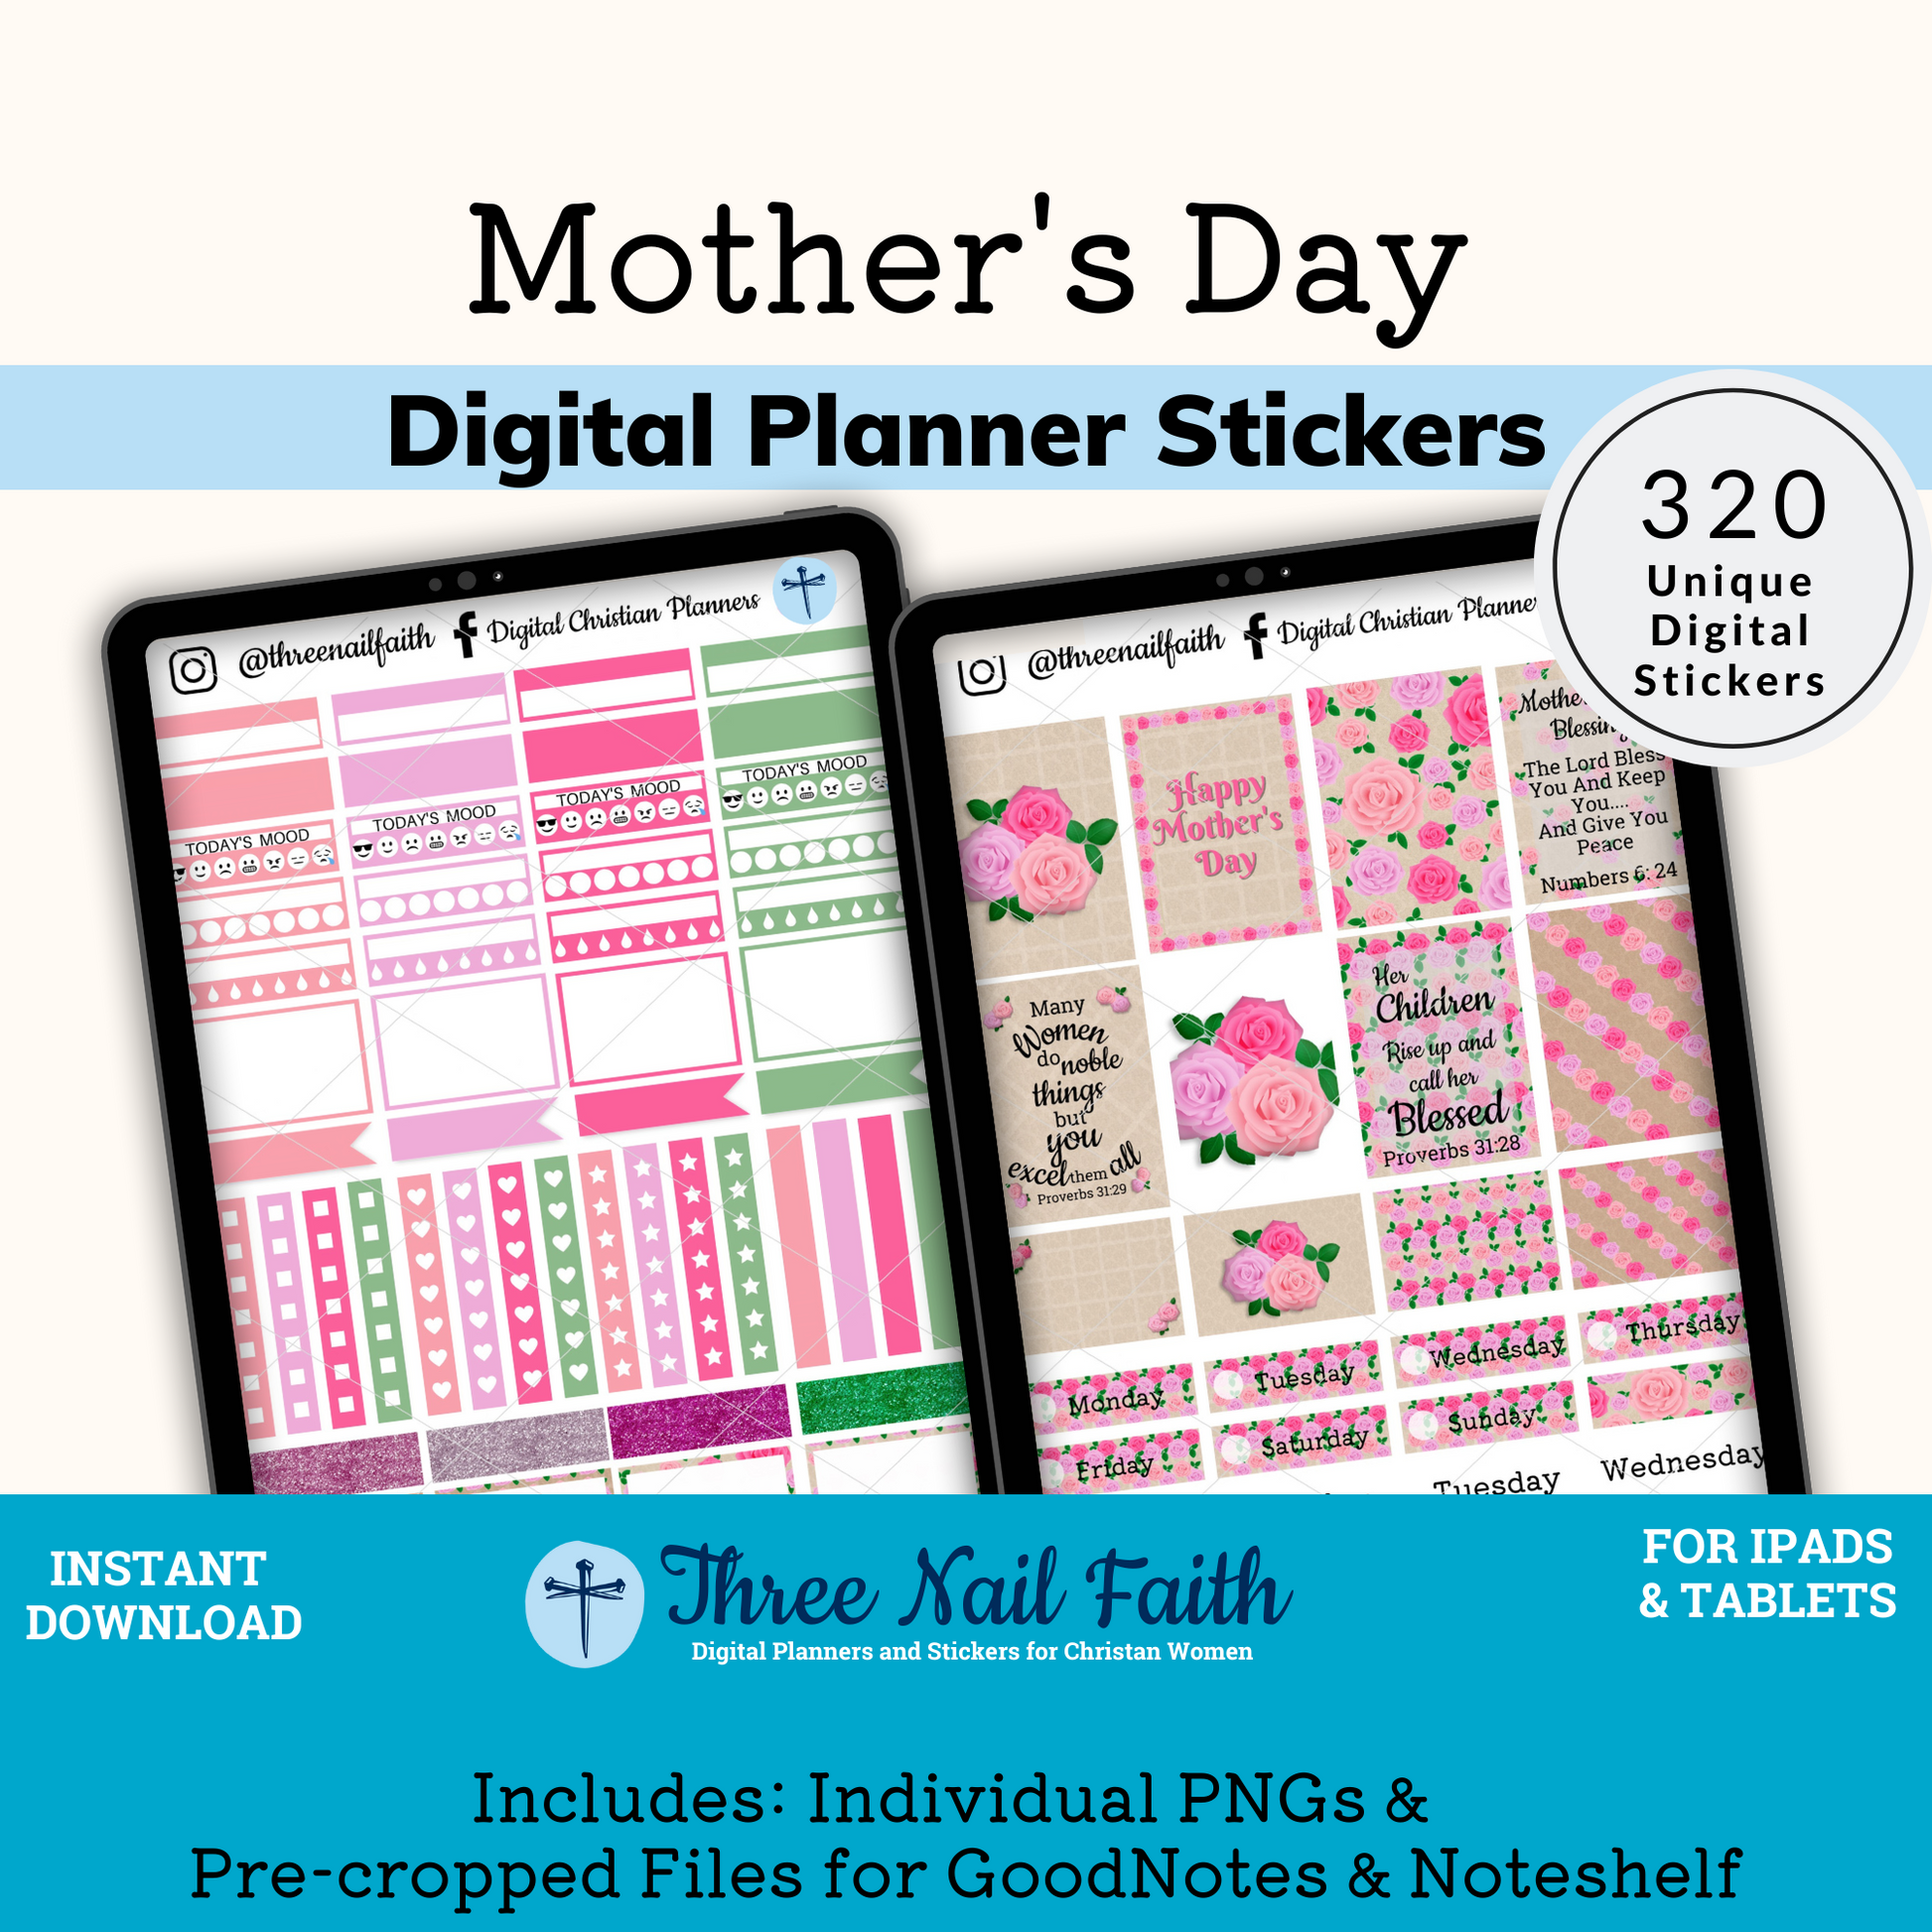 Mothers day digital sticker kit with 320 Digital stickers